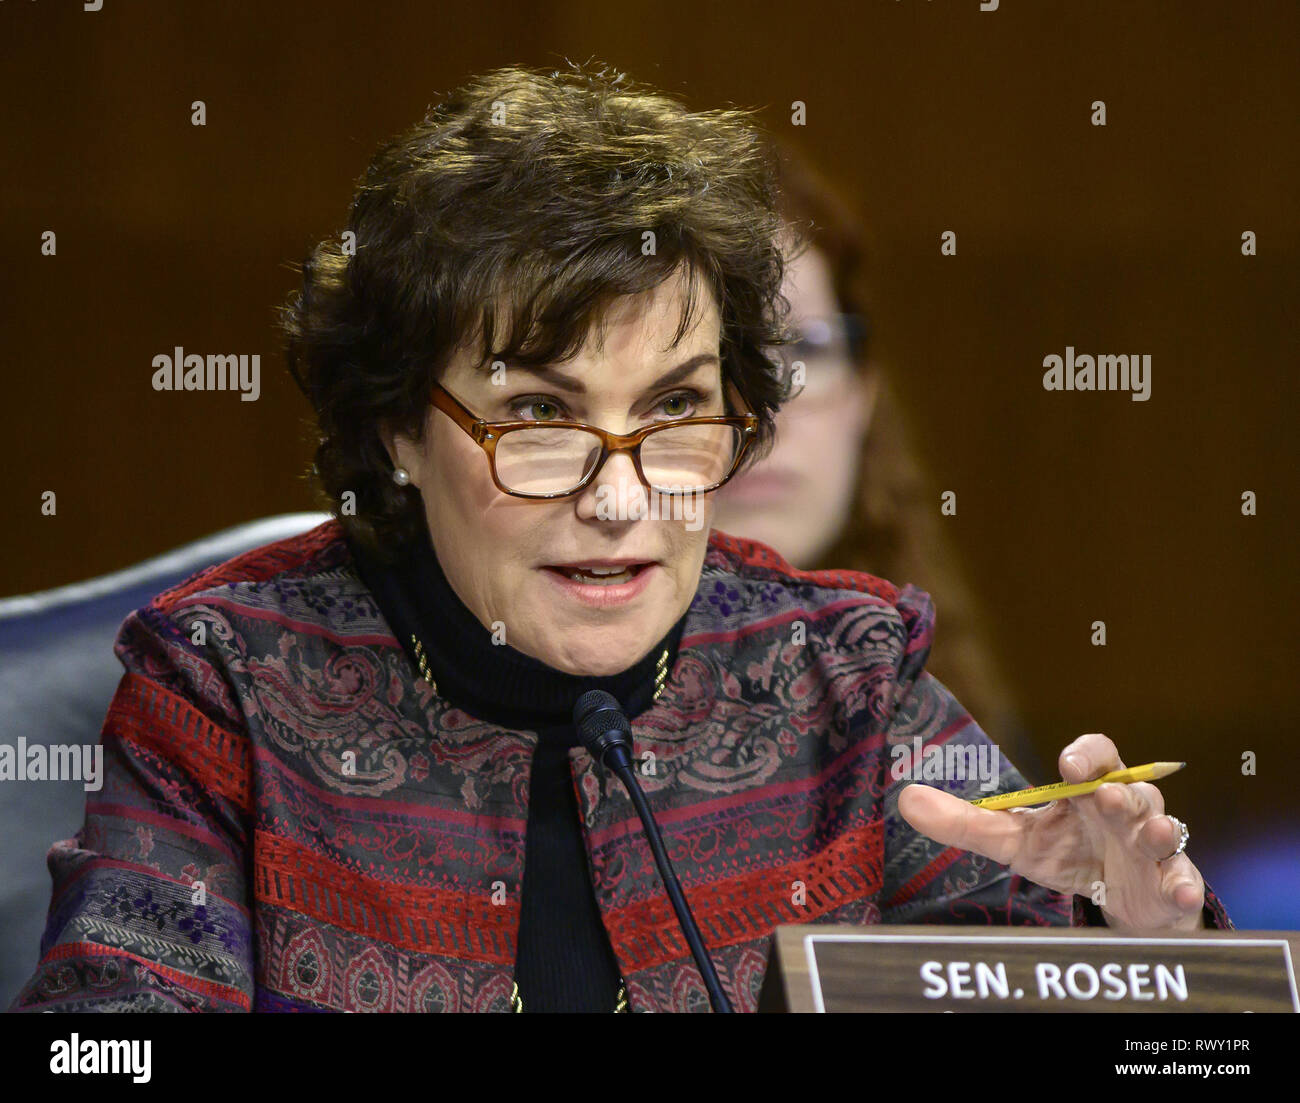 Washington, District of Columbia, USA. 7th Mar, 2019. United States Senator Jacky Rosen (Democrat of Nevada) questions witnesses as they testify before the US Senate Committee on Homeland Security and Governmental Affairs Permanent Subcommittee on Investigations during a hearing on ''Examining Private Sector Data Breaches'' on Capitol Hill in Washington, DC on Thursday, March 7, 2019 Credit: ZUMA Press, Inc./Alamy Live News Stock Photo